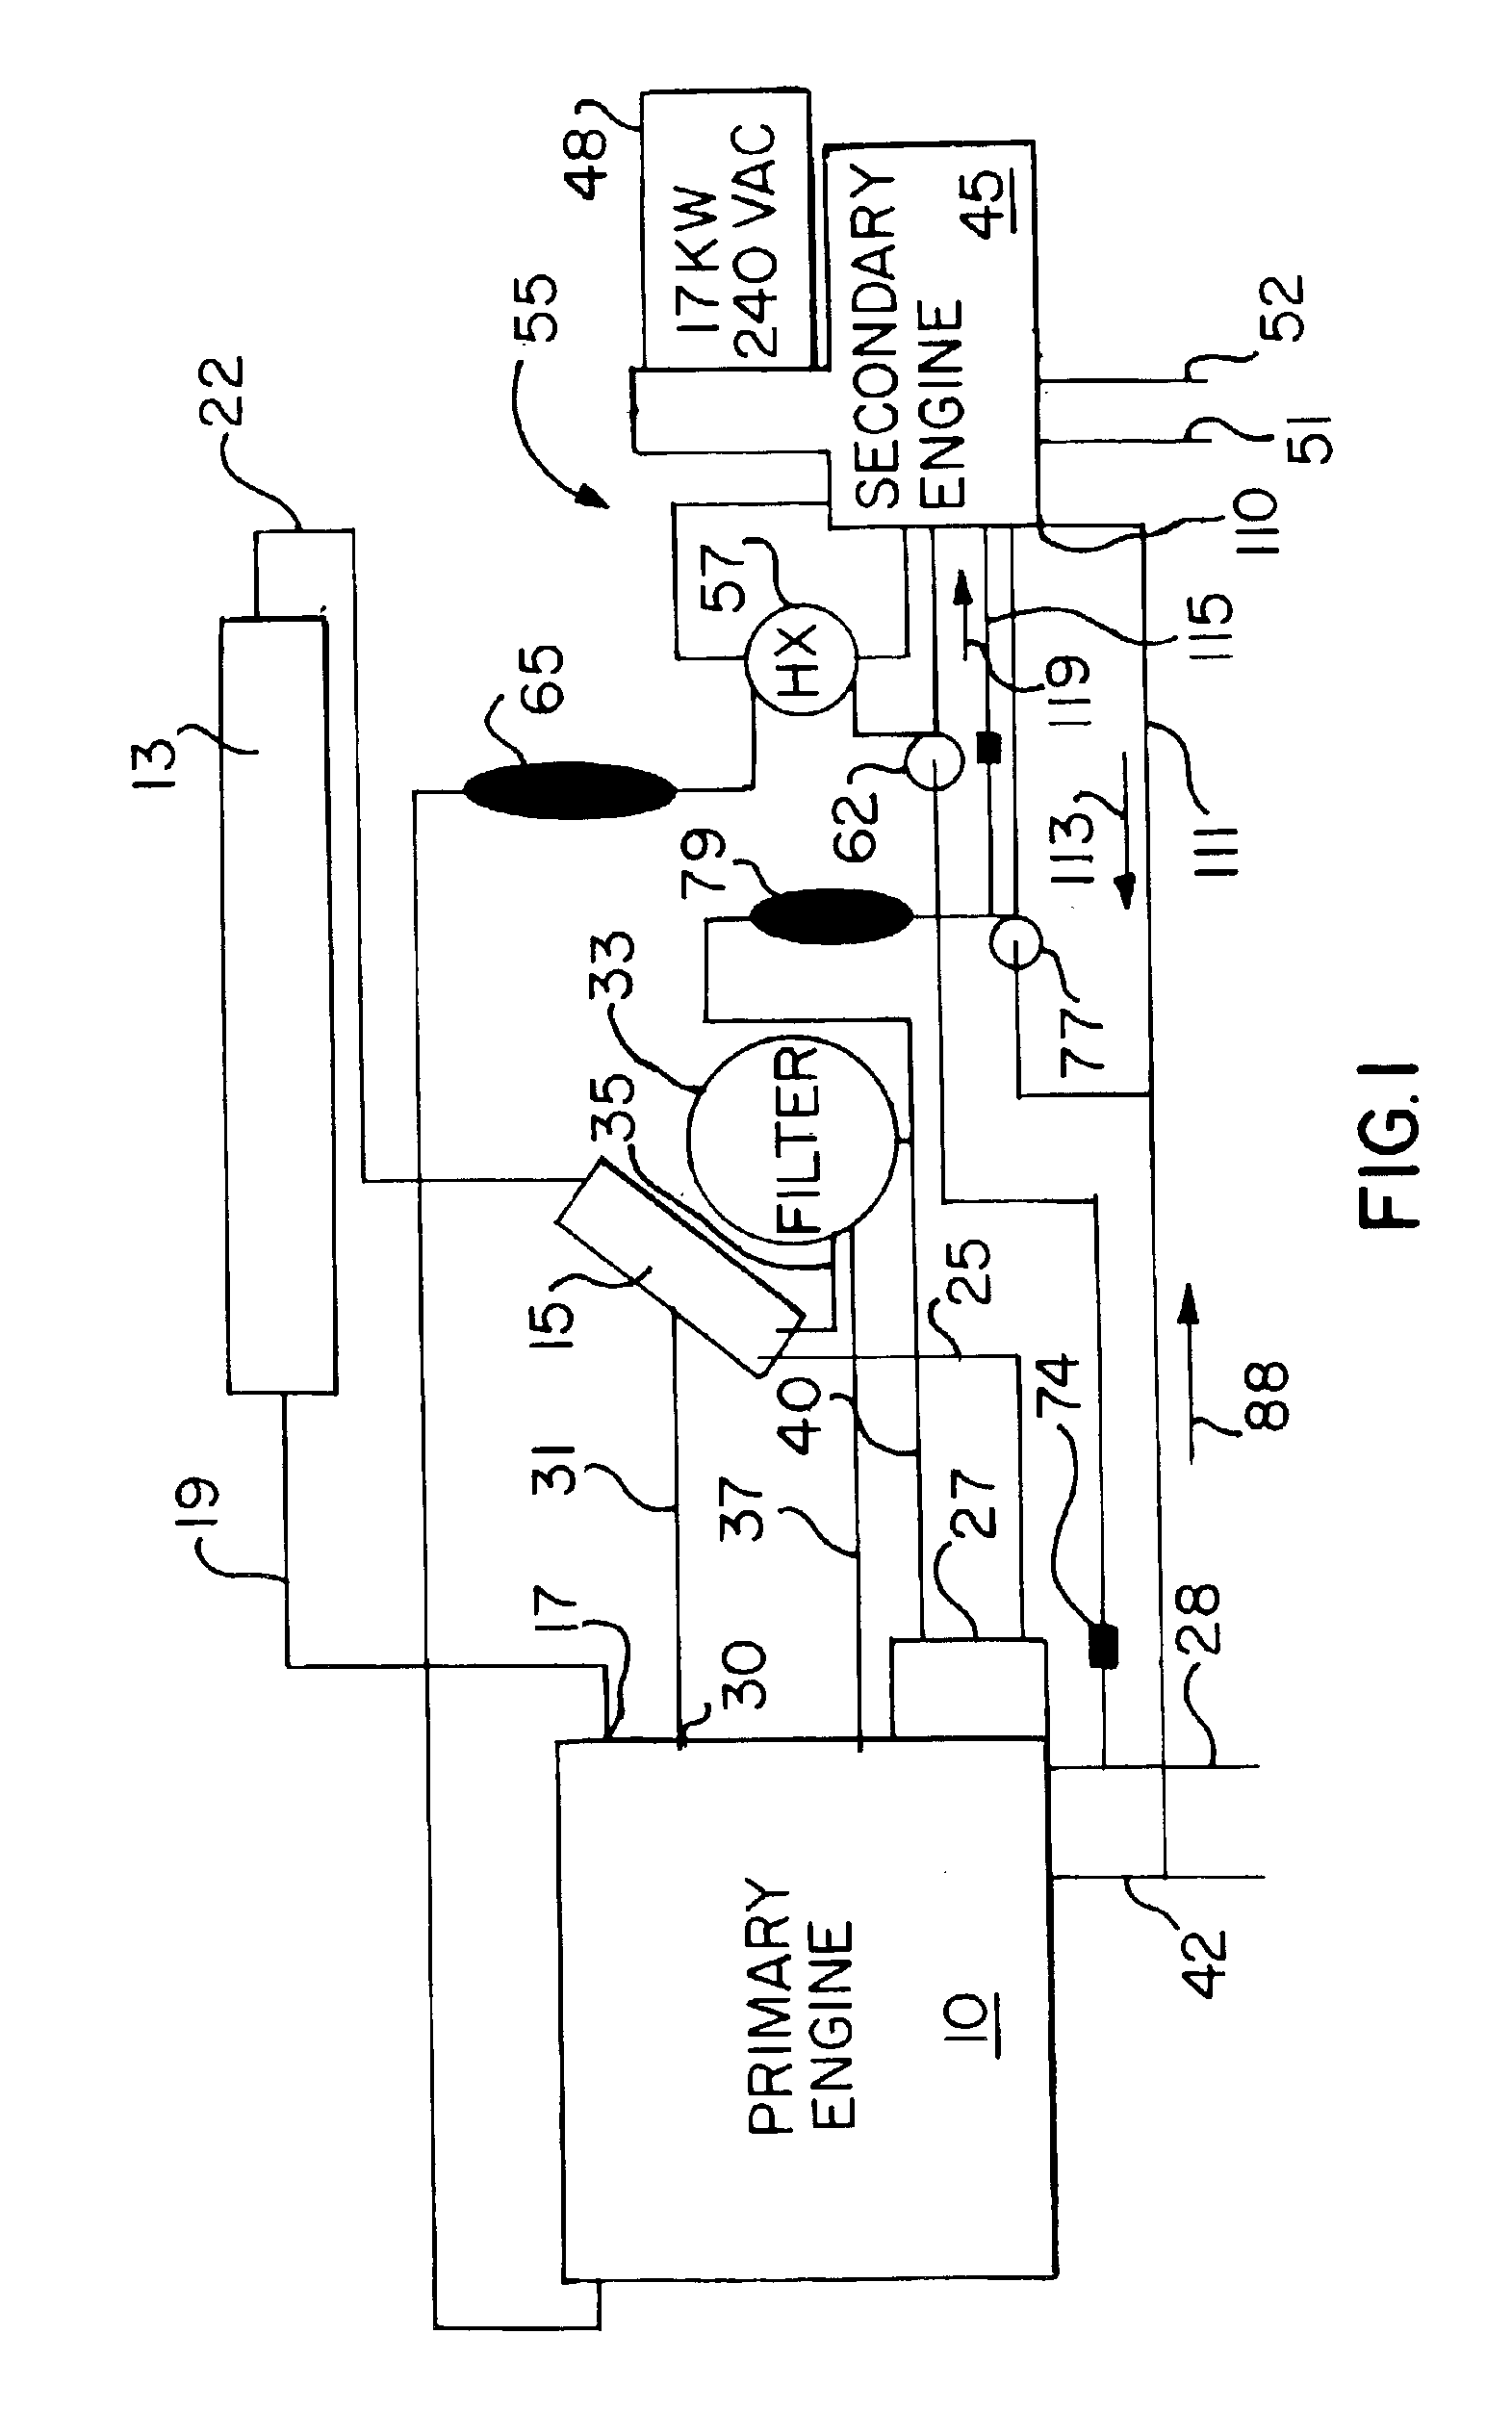 System and method for supplying auxiliary power to a large diesel engine